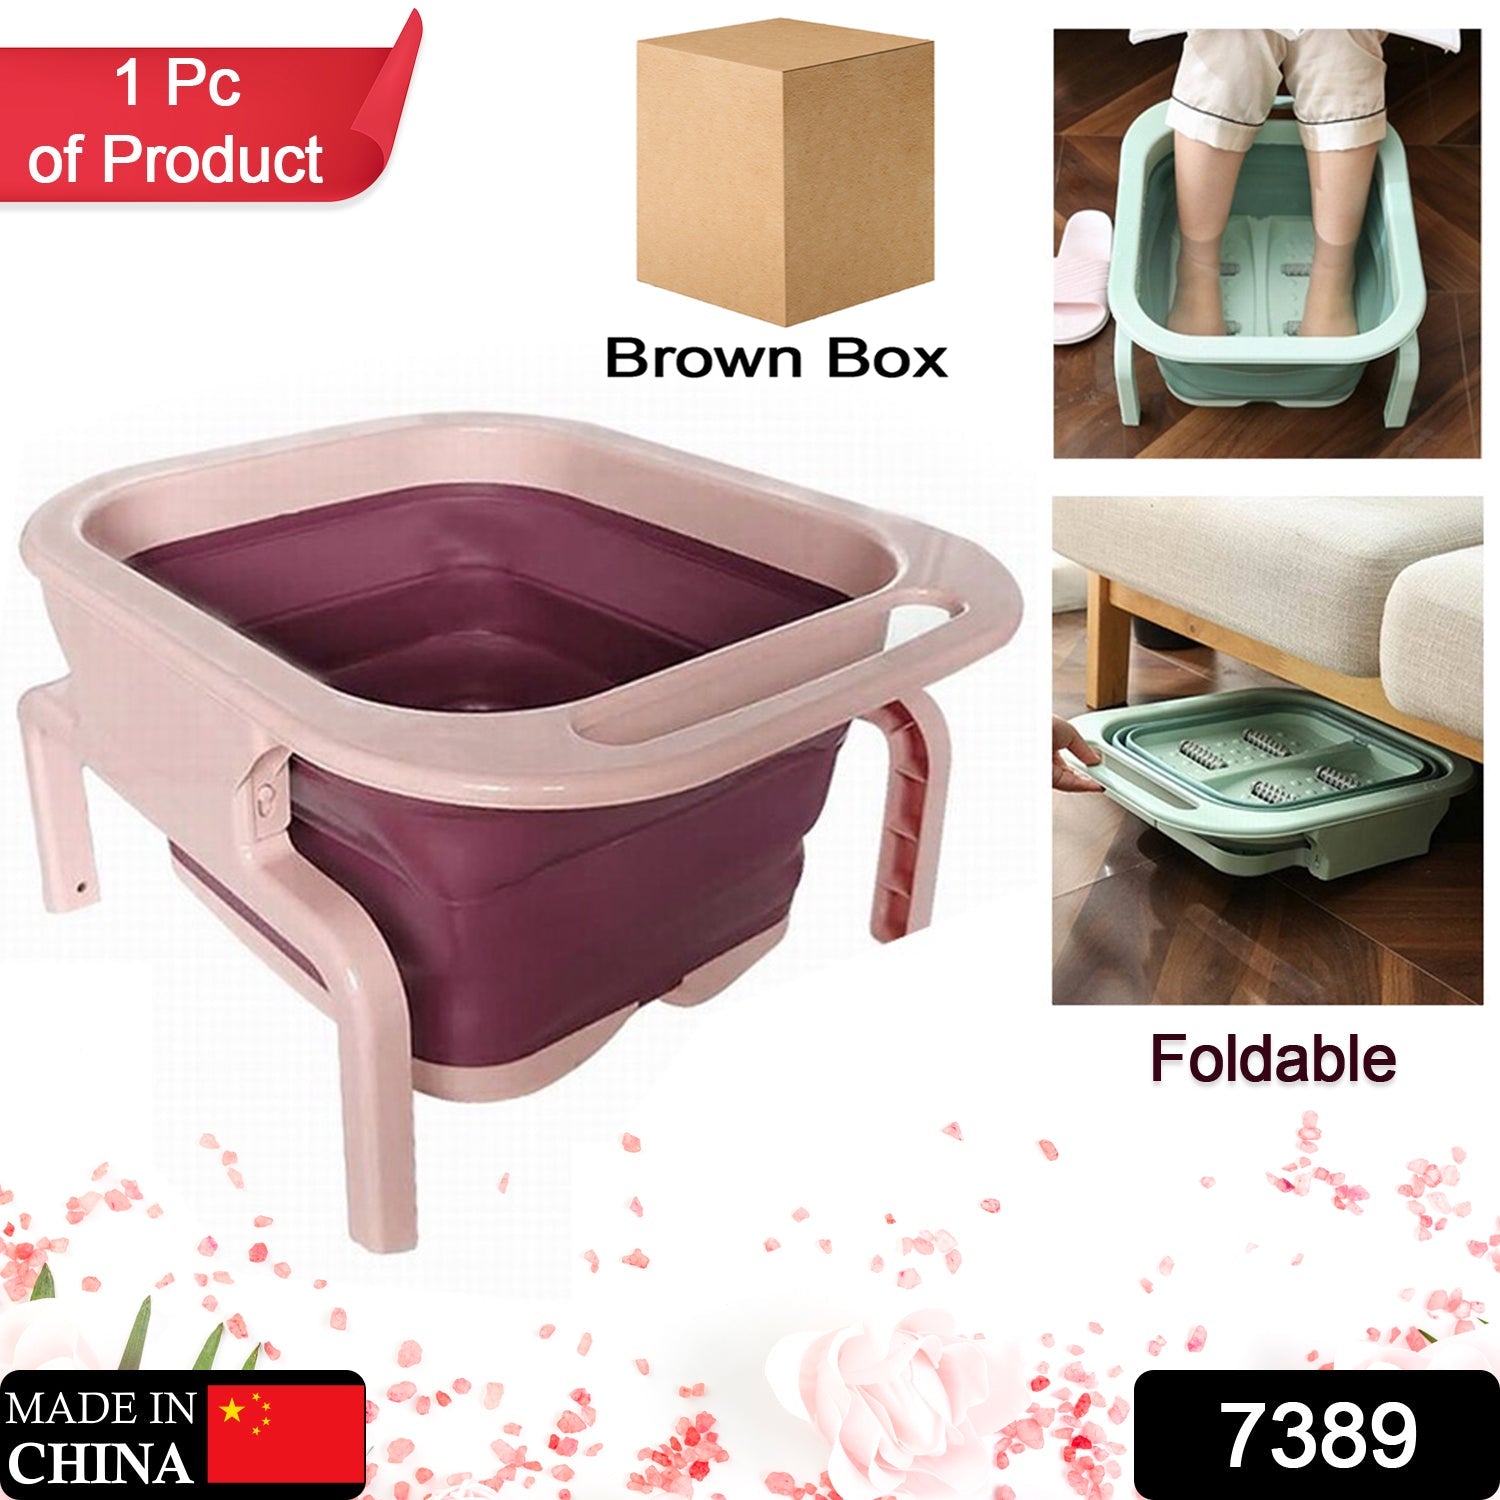 7389 Foldable Soaking Foot Massage Tub, Spa Basin, Bucket with Massage Roller, Suitable For Home Spa Pedicure Relieve Stress 